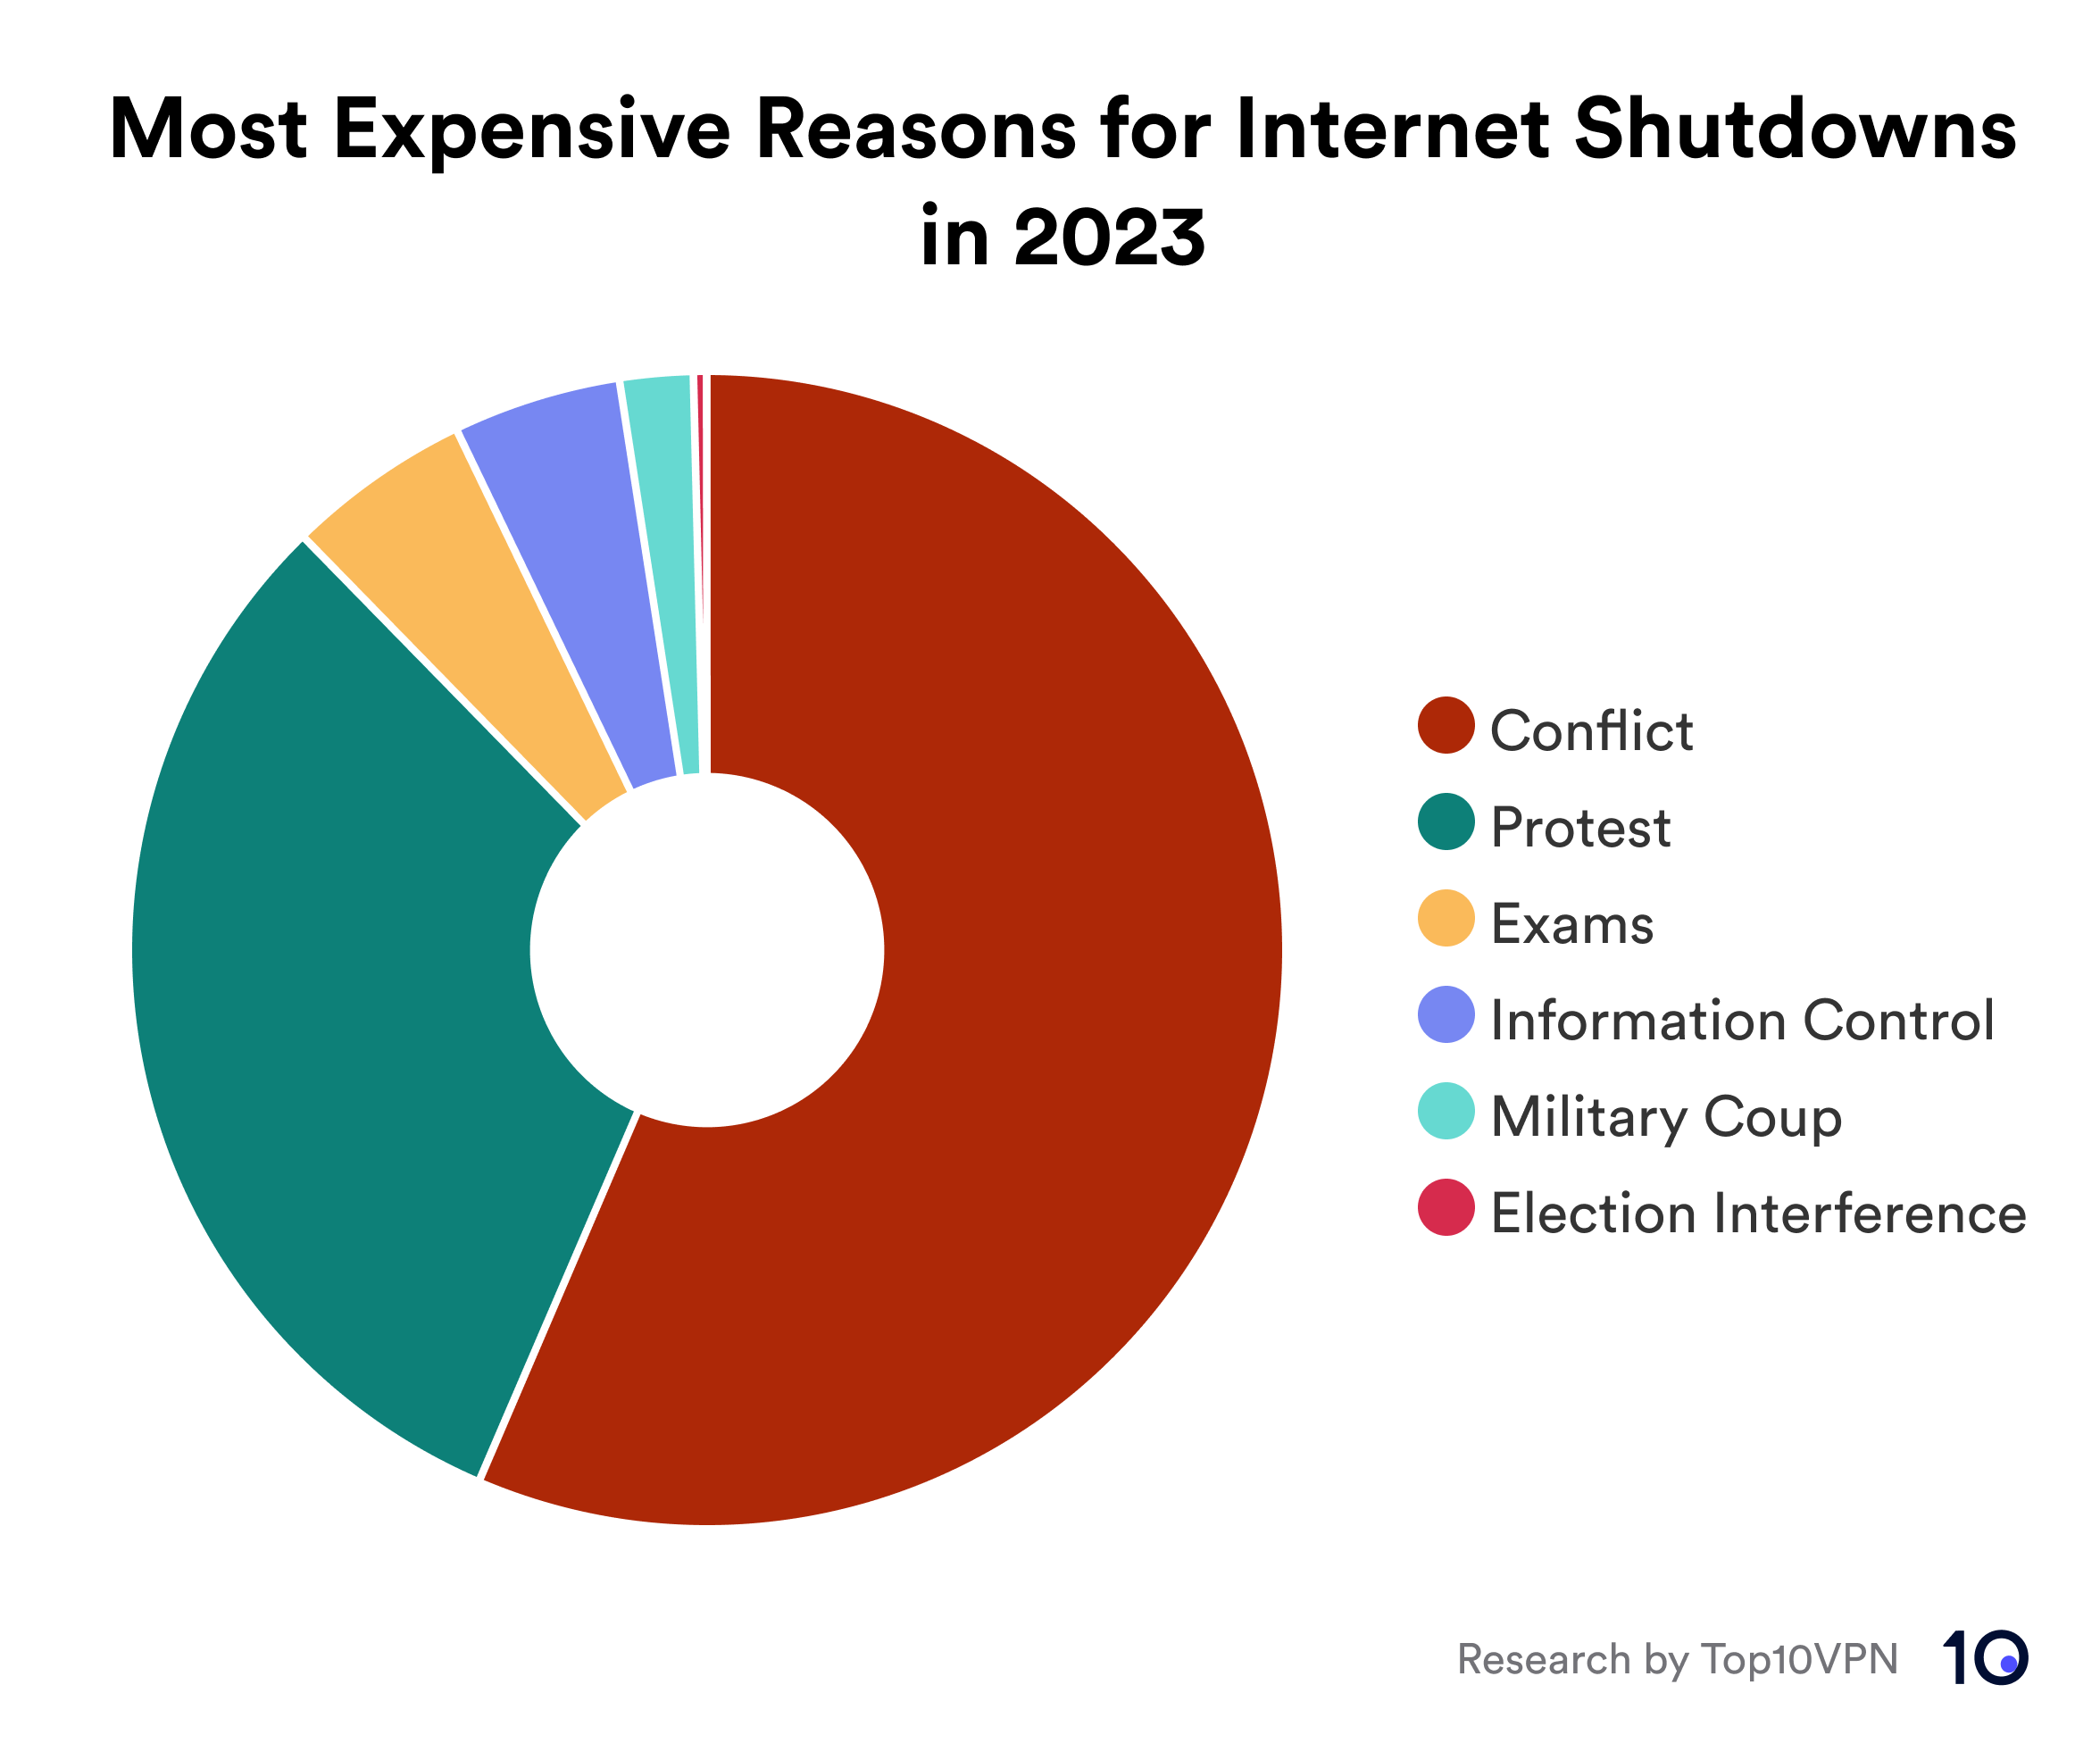 Donut chart showing which reasons for internet shutdowns had the most economic impact in 2023